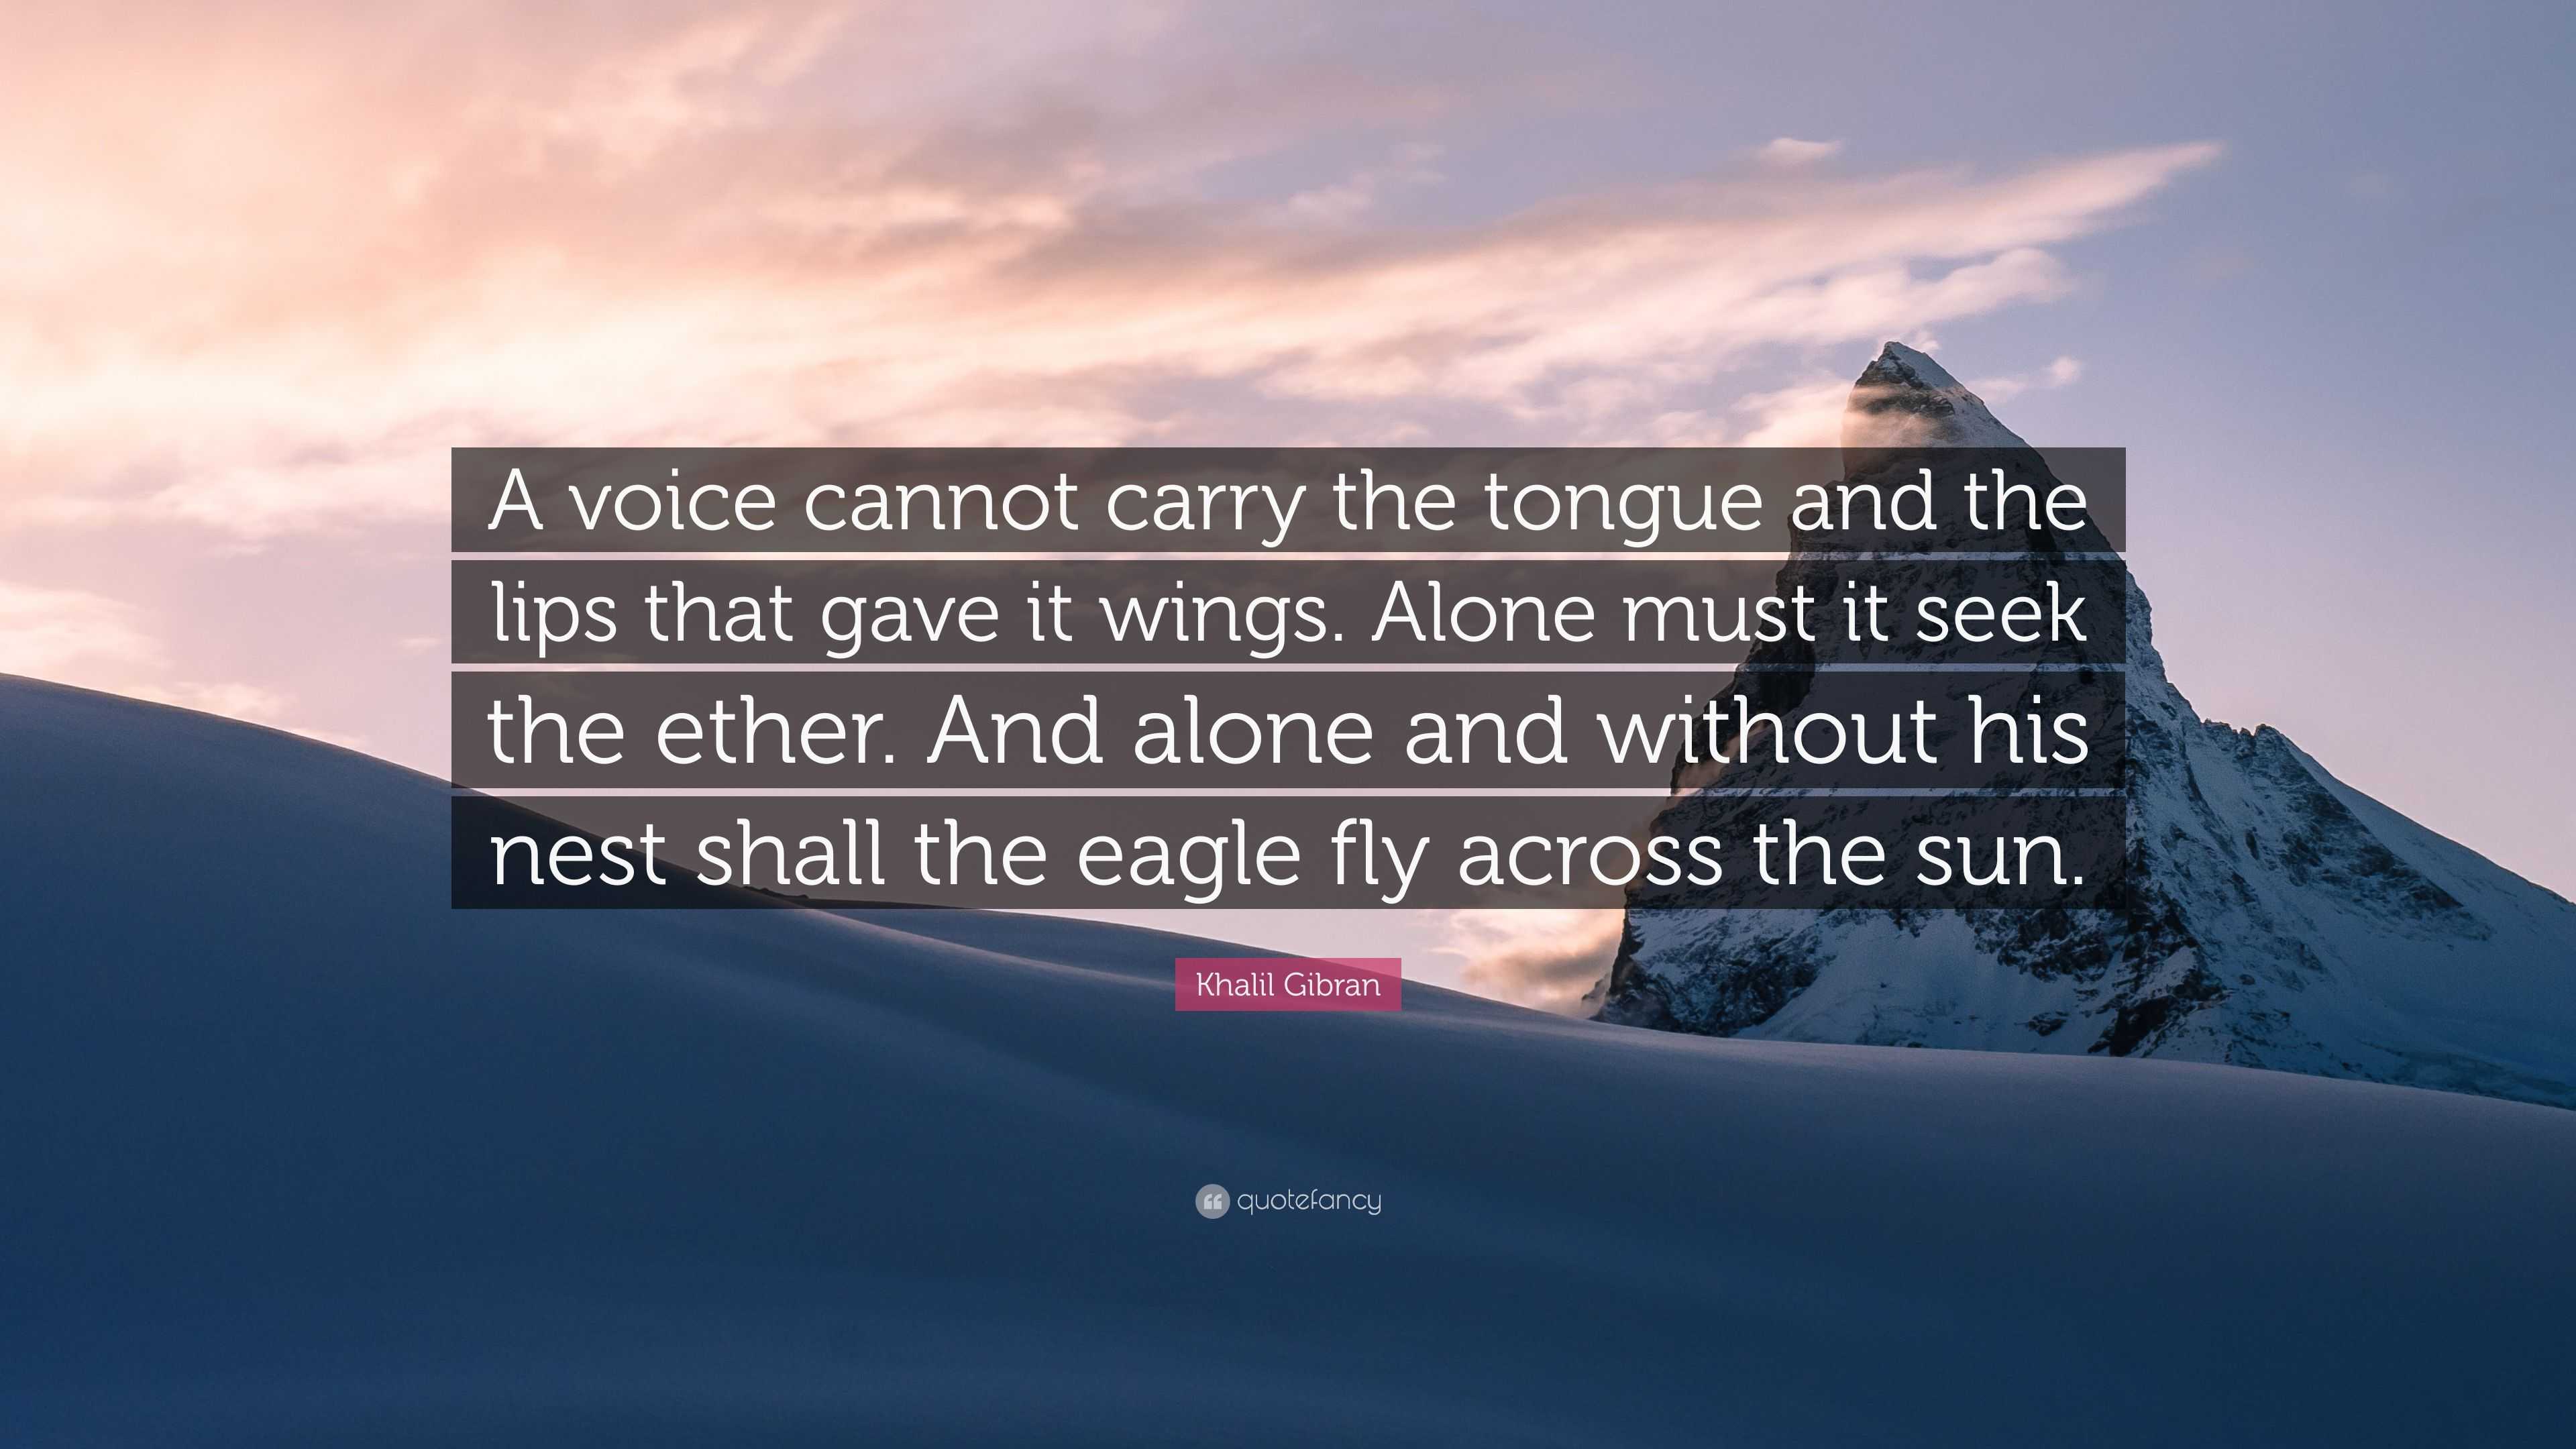 Khalil Gibran Quote: “A voice cannot carry the tongue and the lips that  gave it wings. Alone must it seek the ether. And alone and without his”